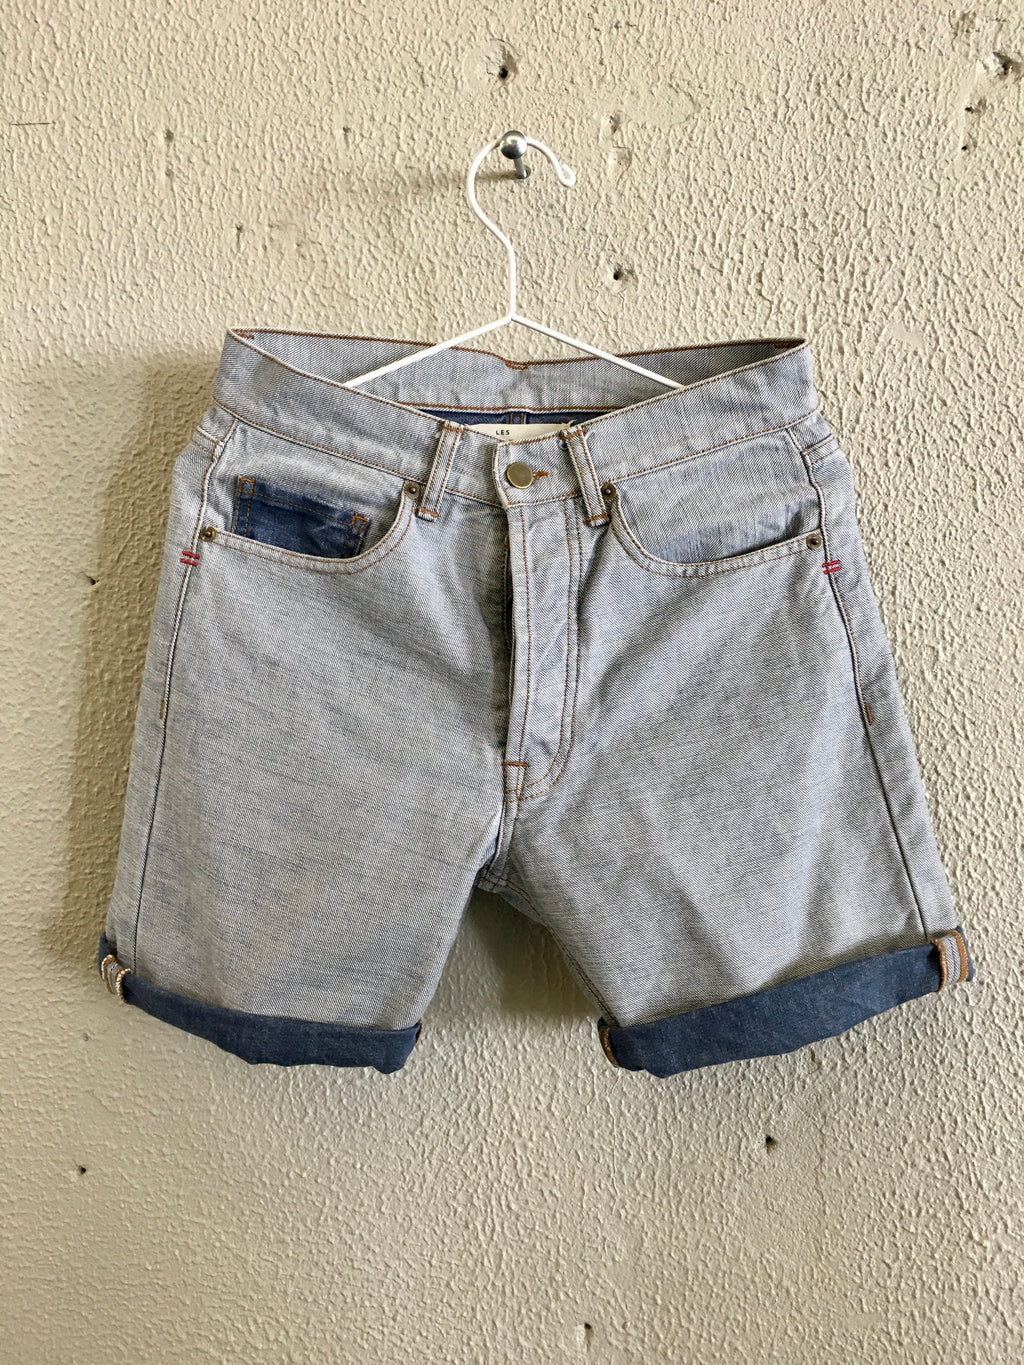 Boat Shorts Inside Out